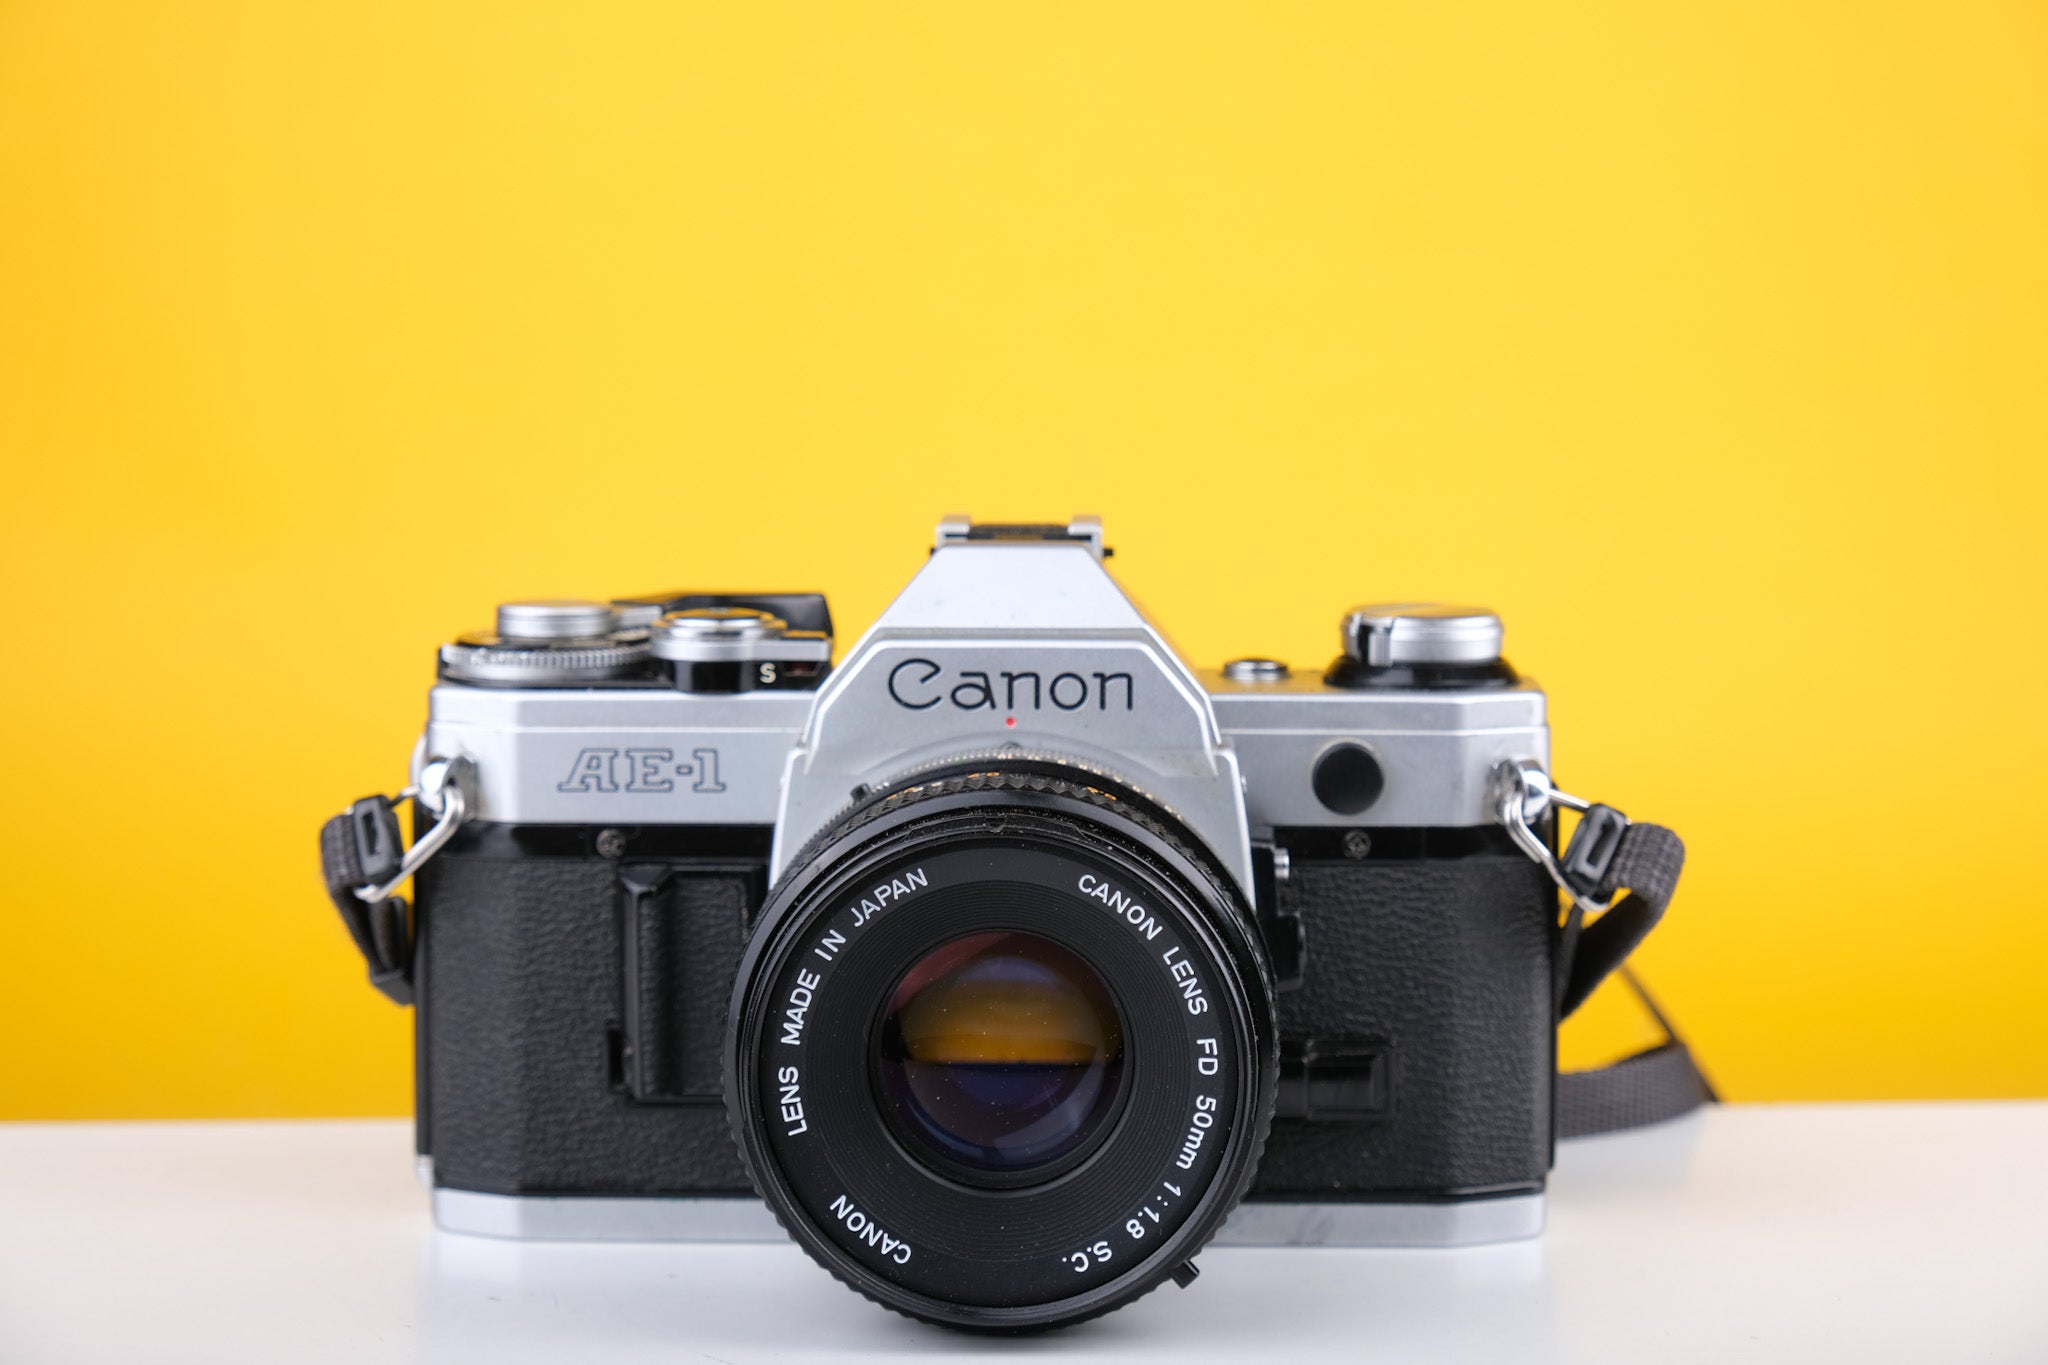 Canon AE-1 35mm SLR Film Camera with 50mm f1.8 lens